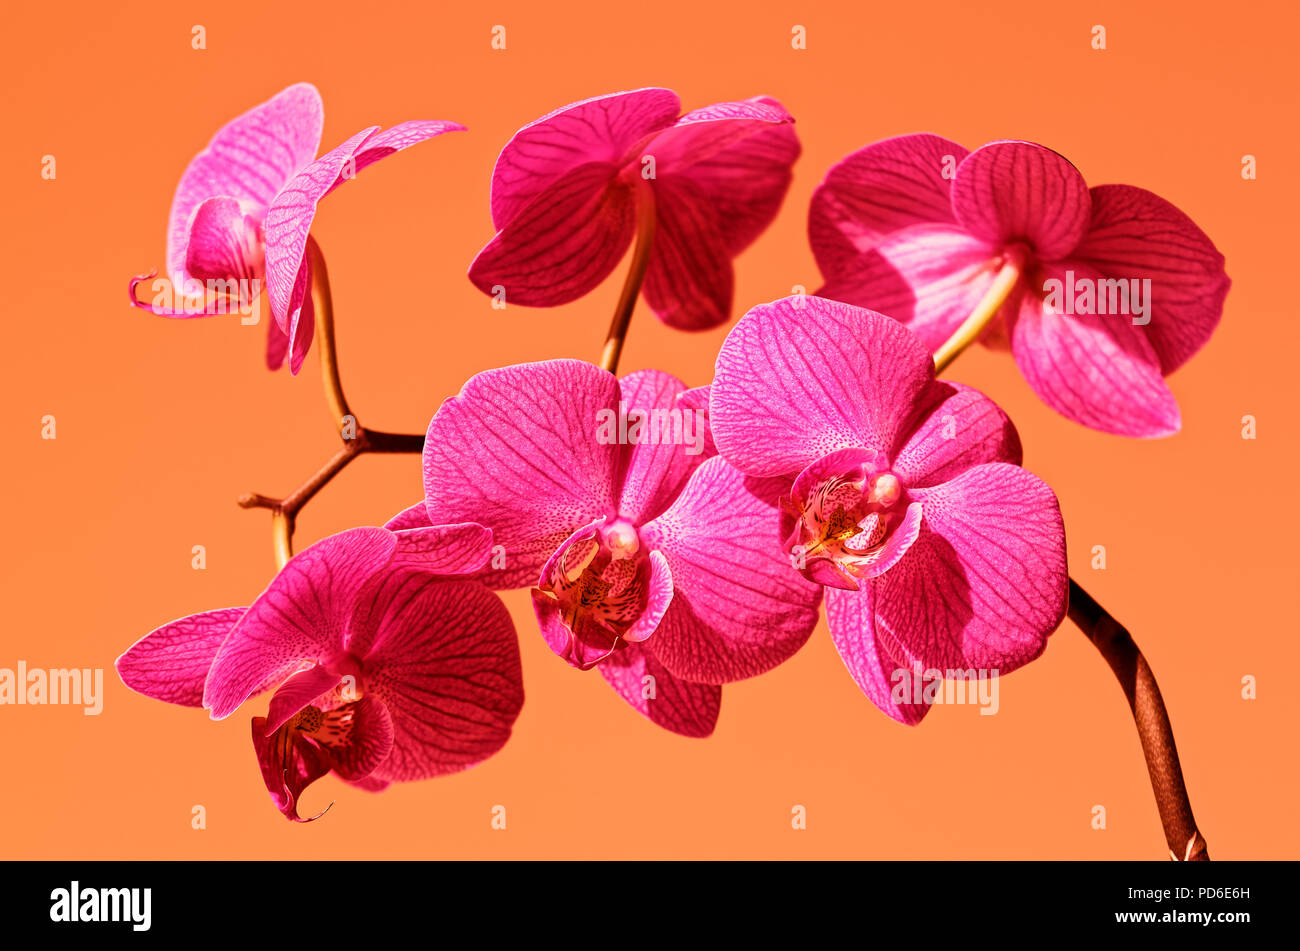 Phalaenopsis orchid in bloom. Close up photo with orange background Stock Photo